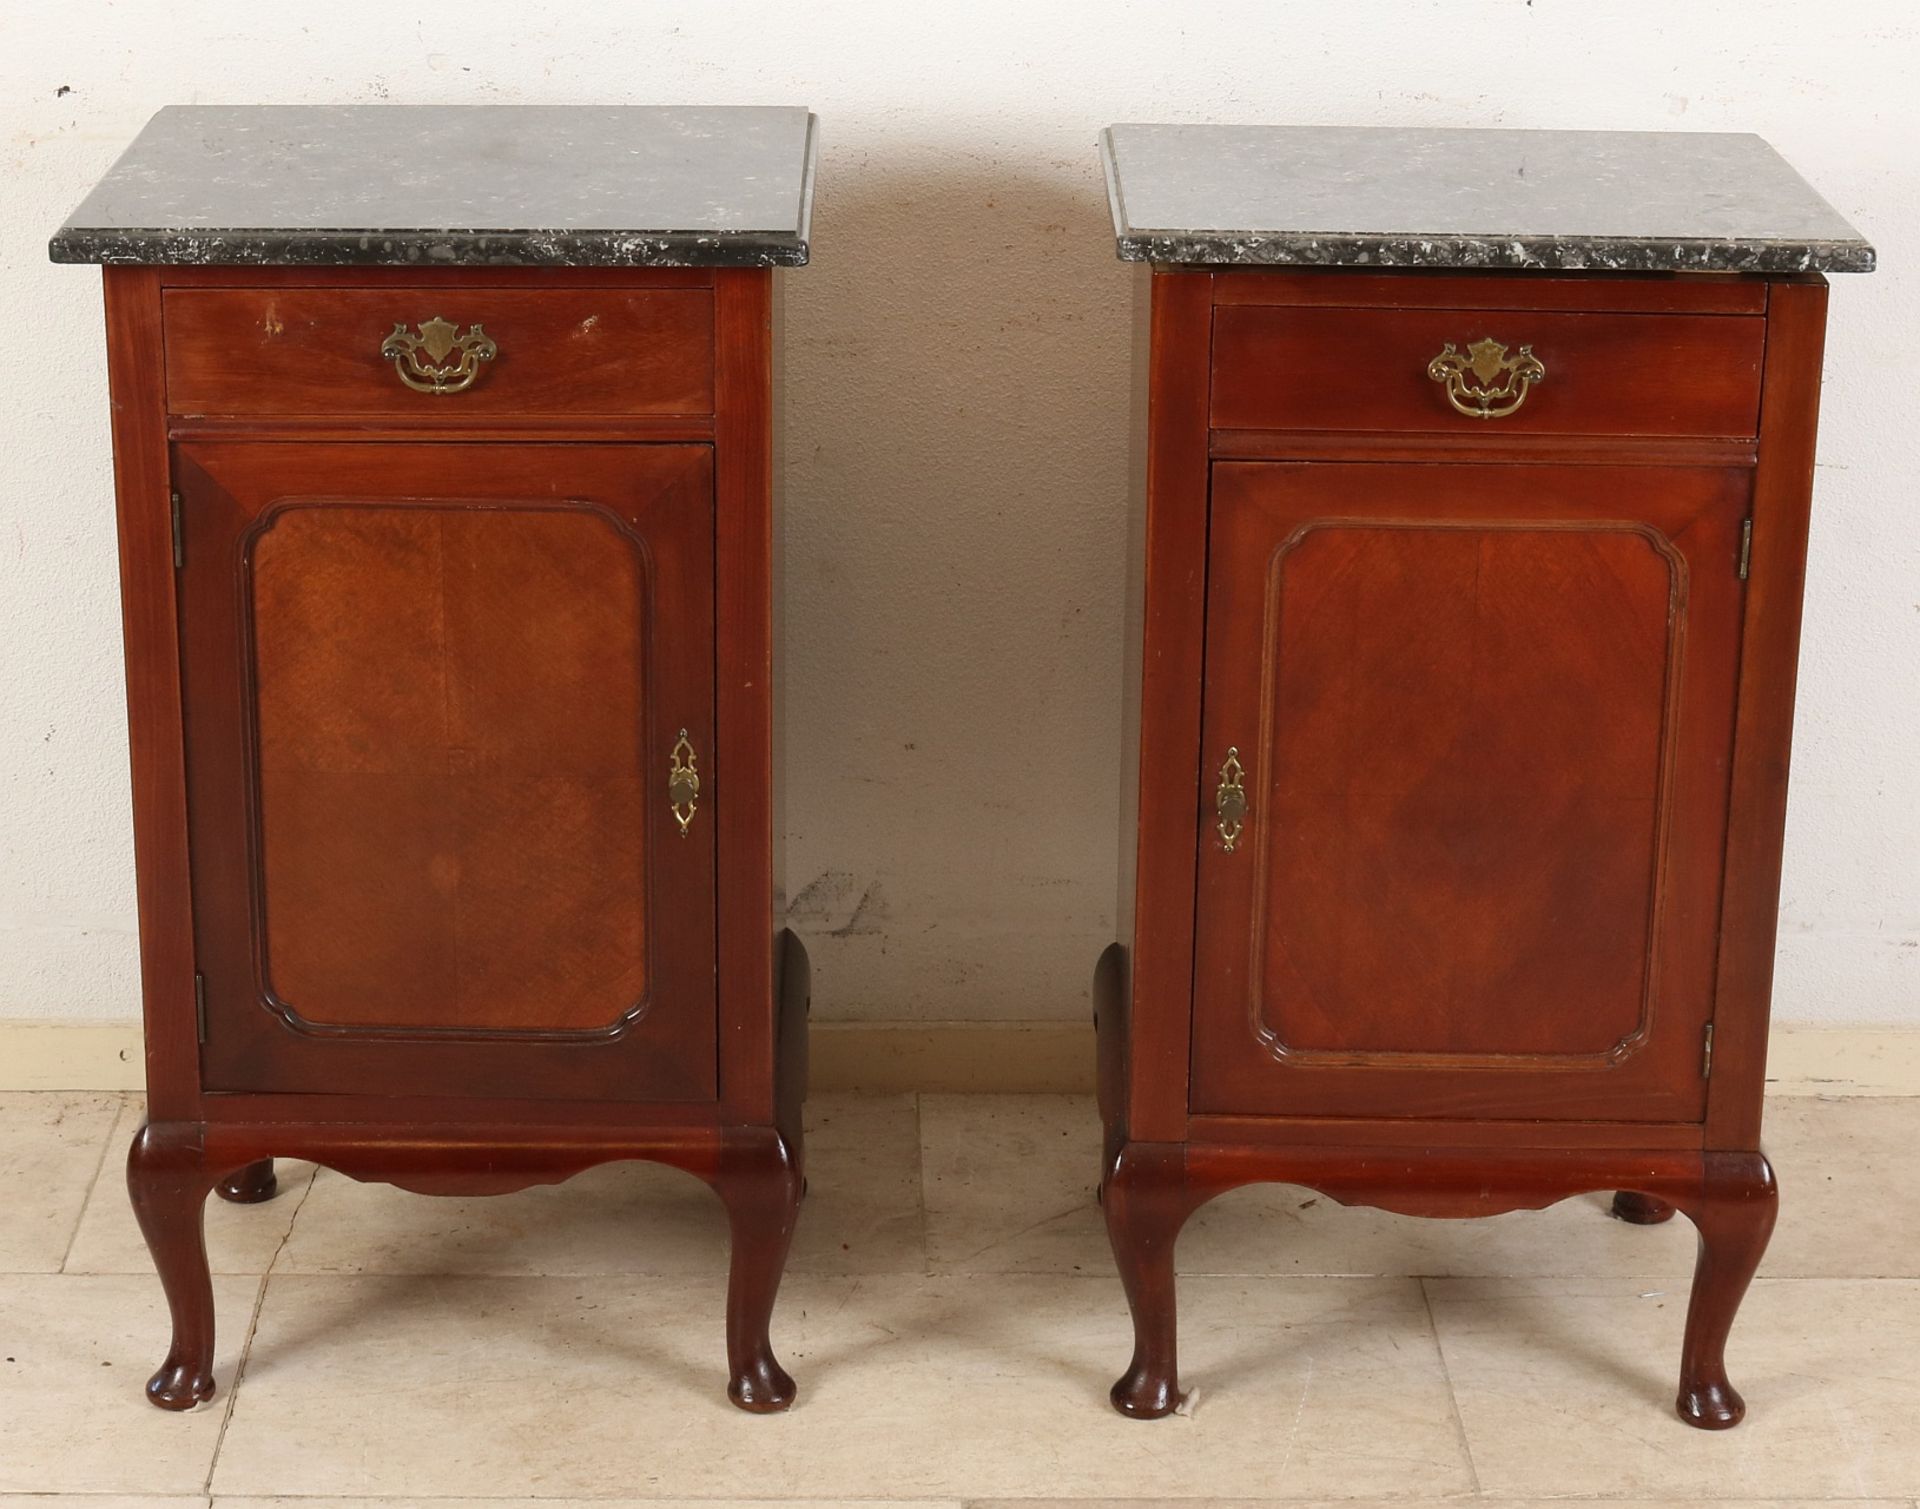 Two antique English bedside tables